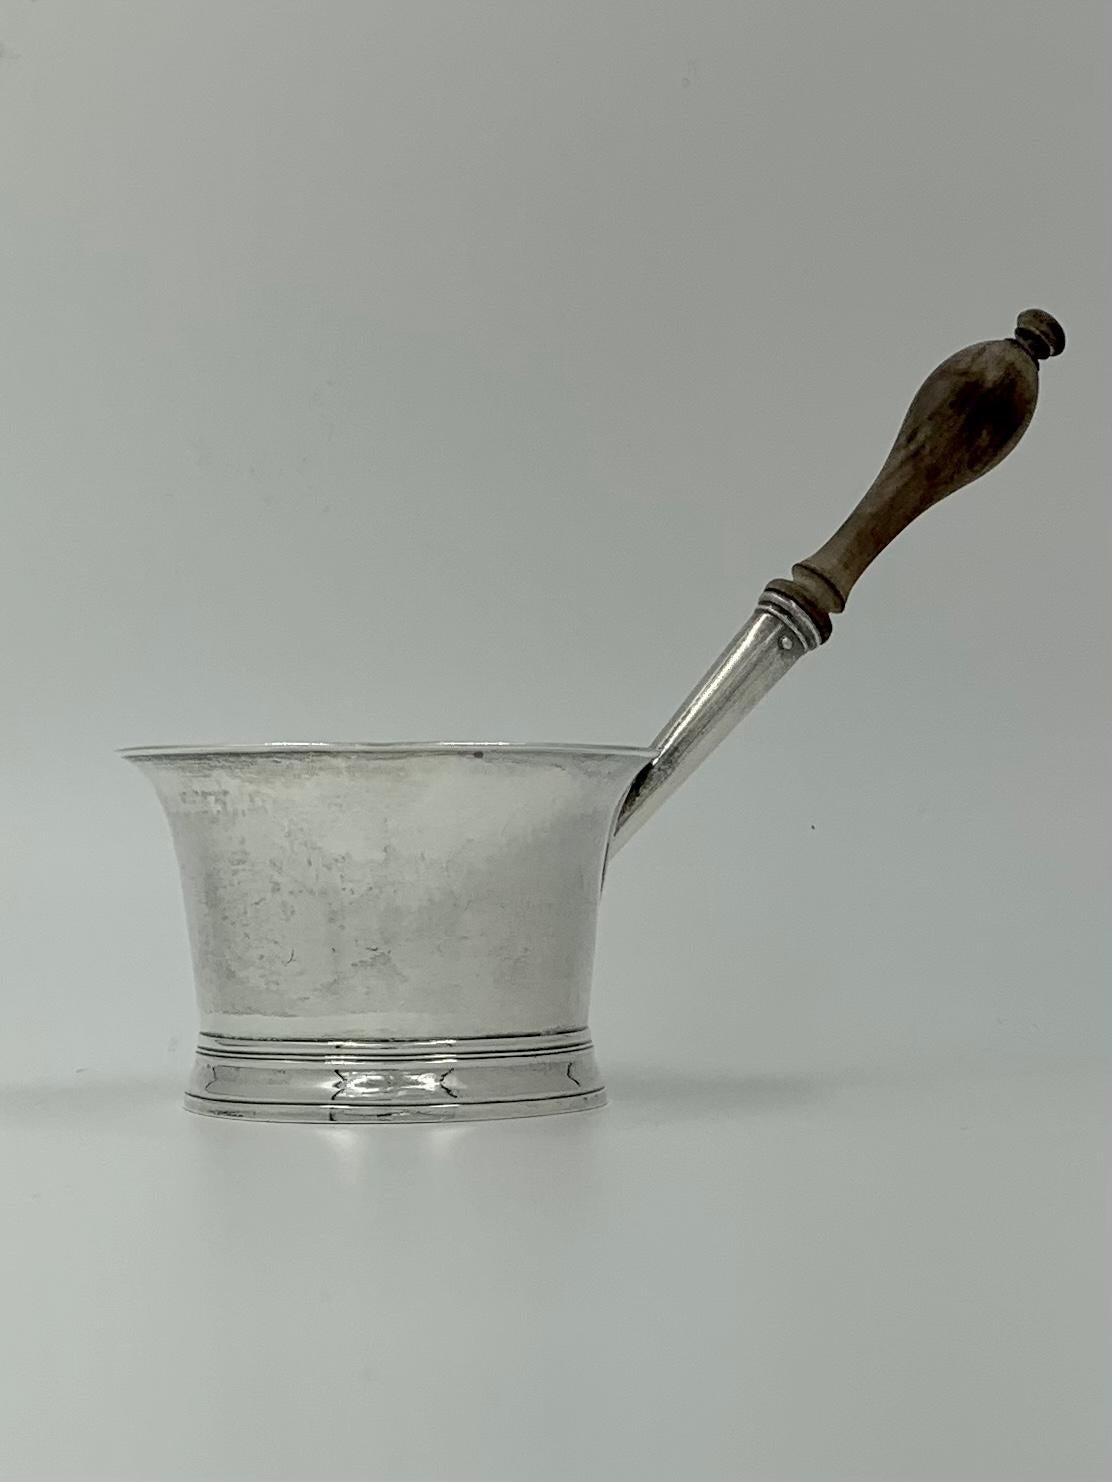 Splendid antique English sterling silver brandy/spirits warmer, George II period, 1743
Attributed to Edward Wakelin- the initials in the Gothic style correspond to Wakelin's, perhaps a variation of his best known mark with the fleur de lis